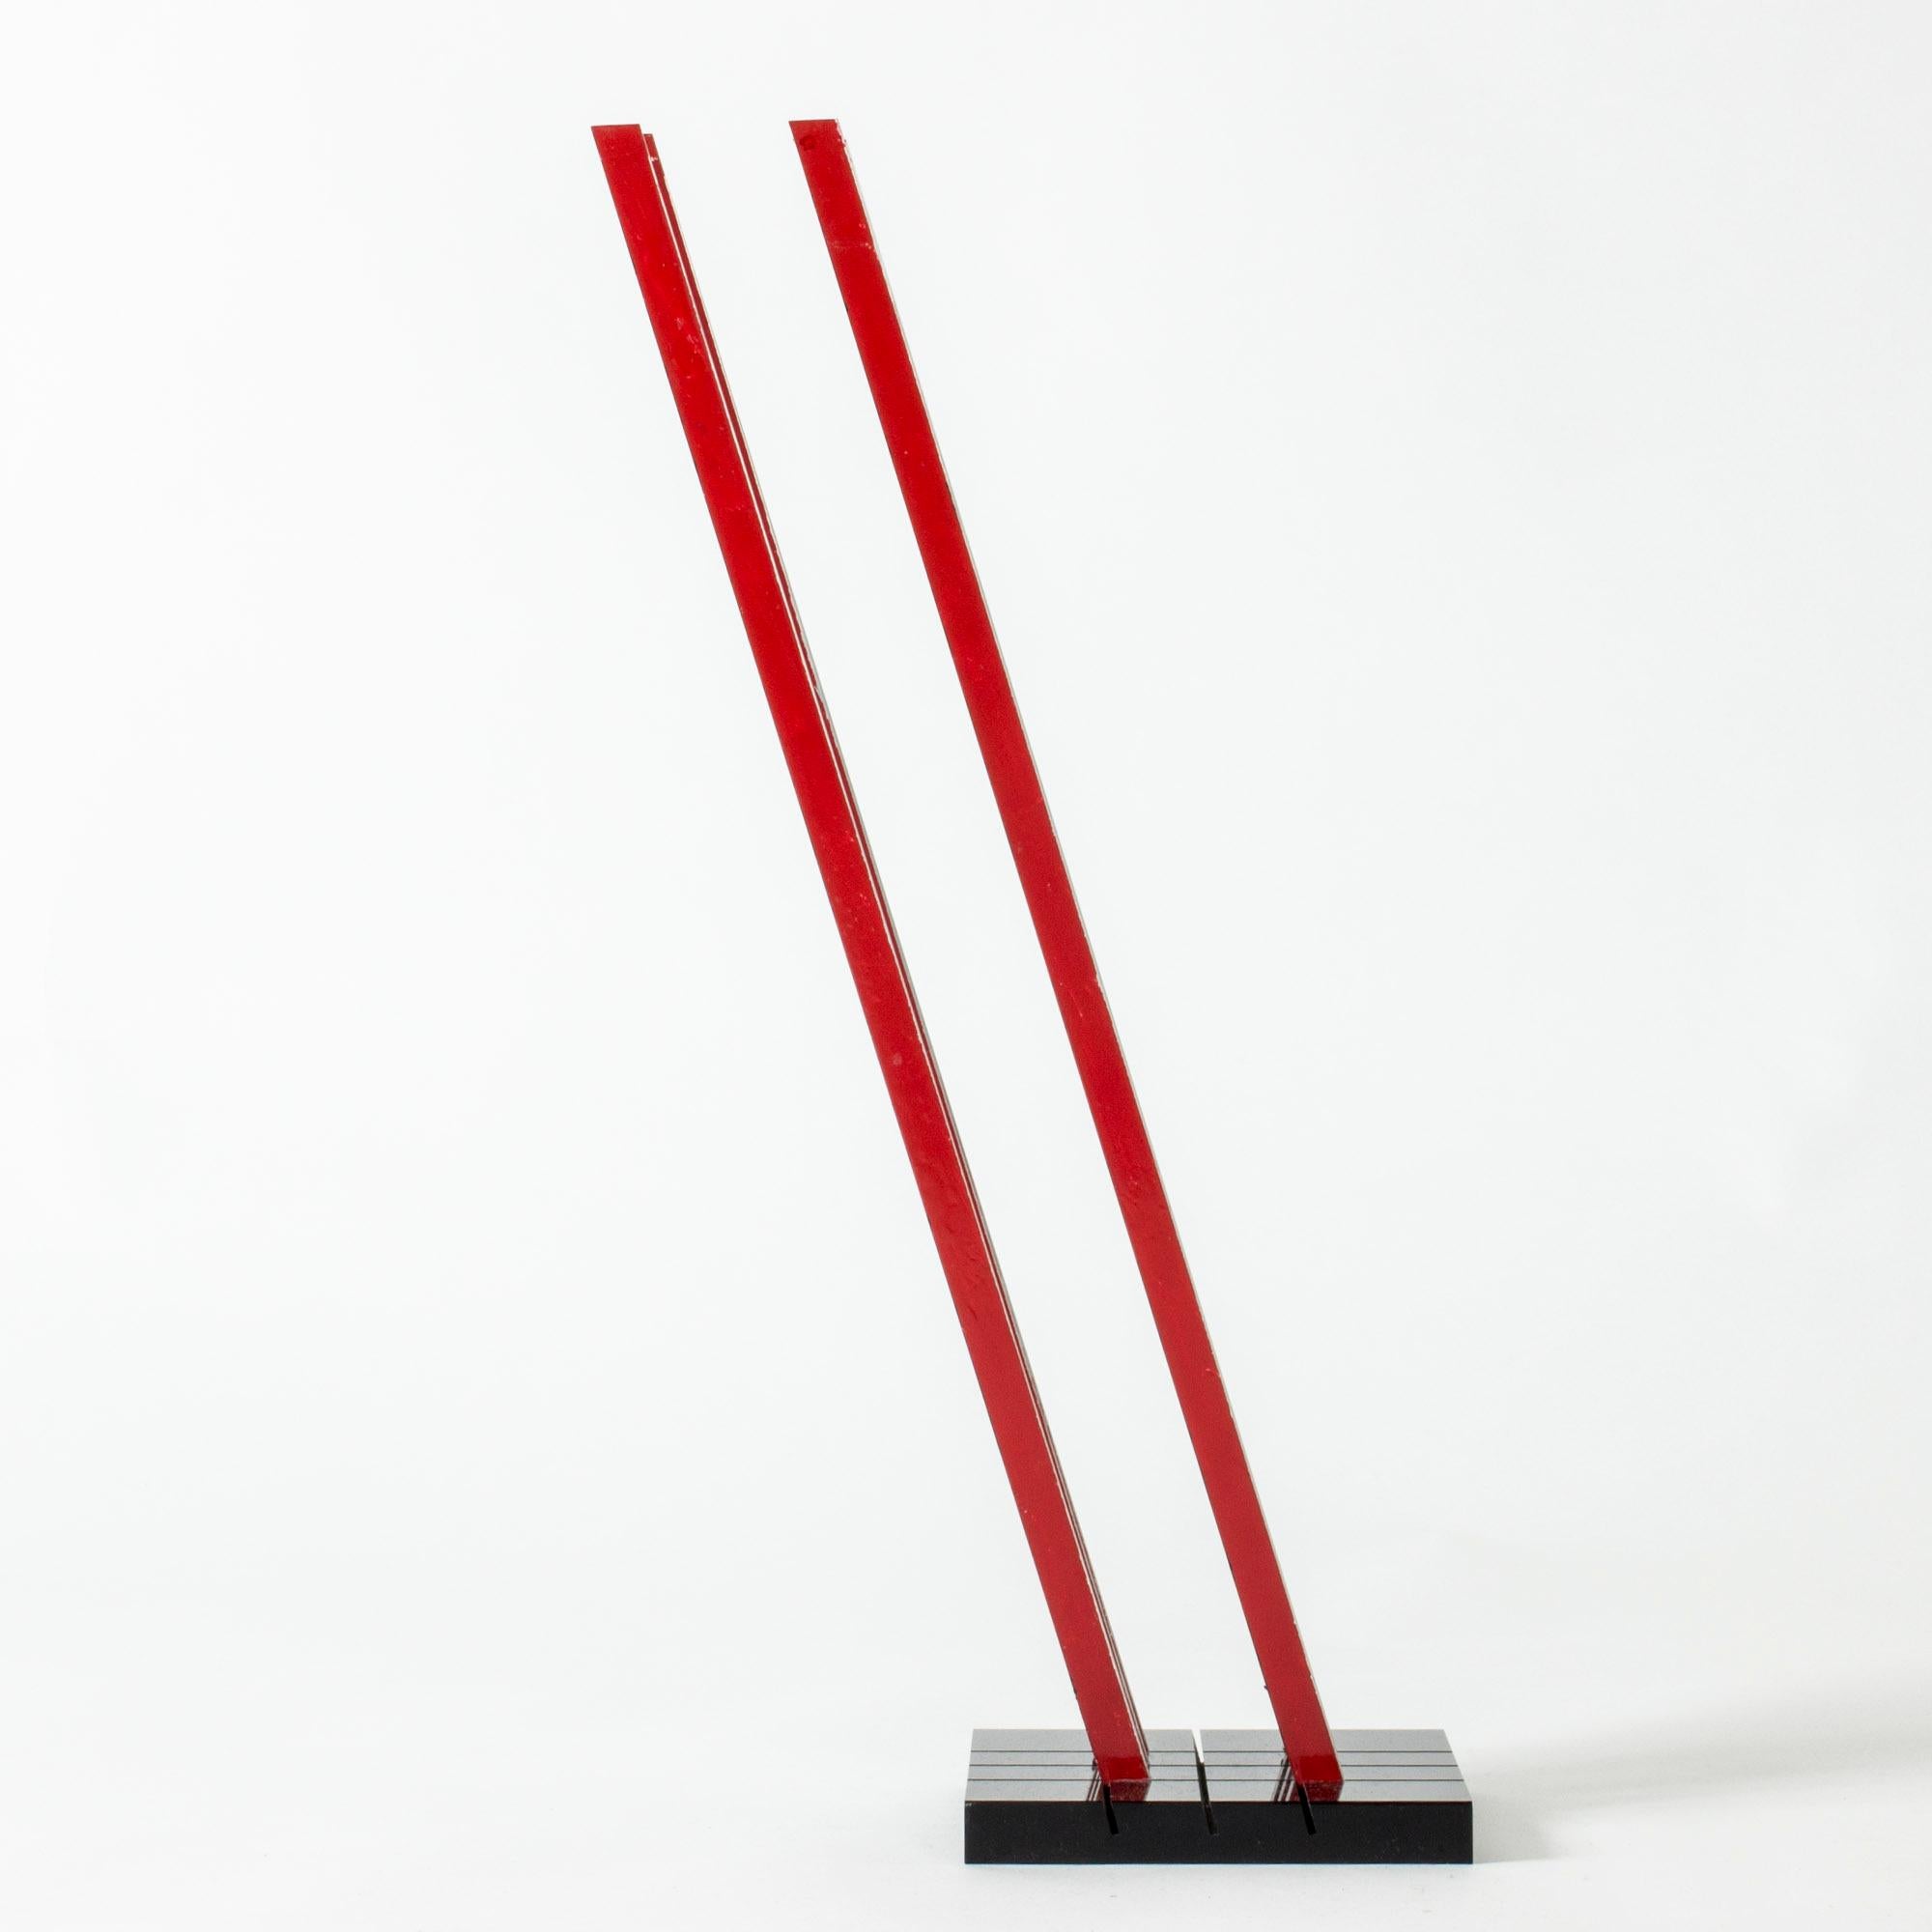 Striking sculpture by Lars Erik Falk, made from metal strands tilted at Falk’s signature 73 degrees. Painted red, blue, black, one side unpainted metal. Great play with colors and angles.

Lars Erik Falk (1922-1918) was one of Sweden’s foremost